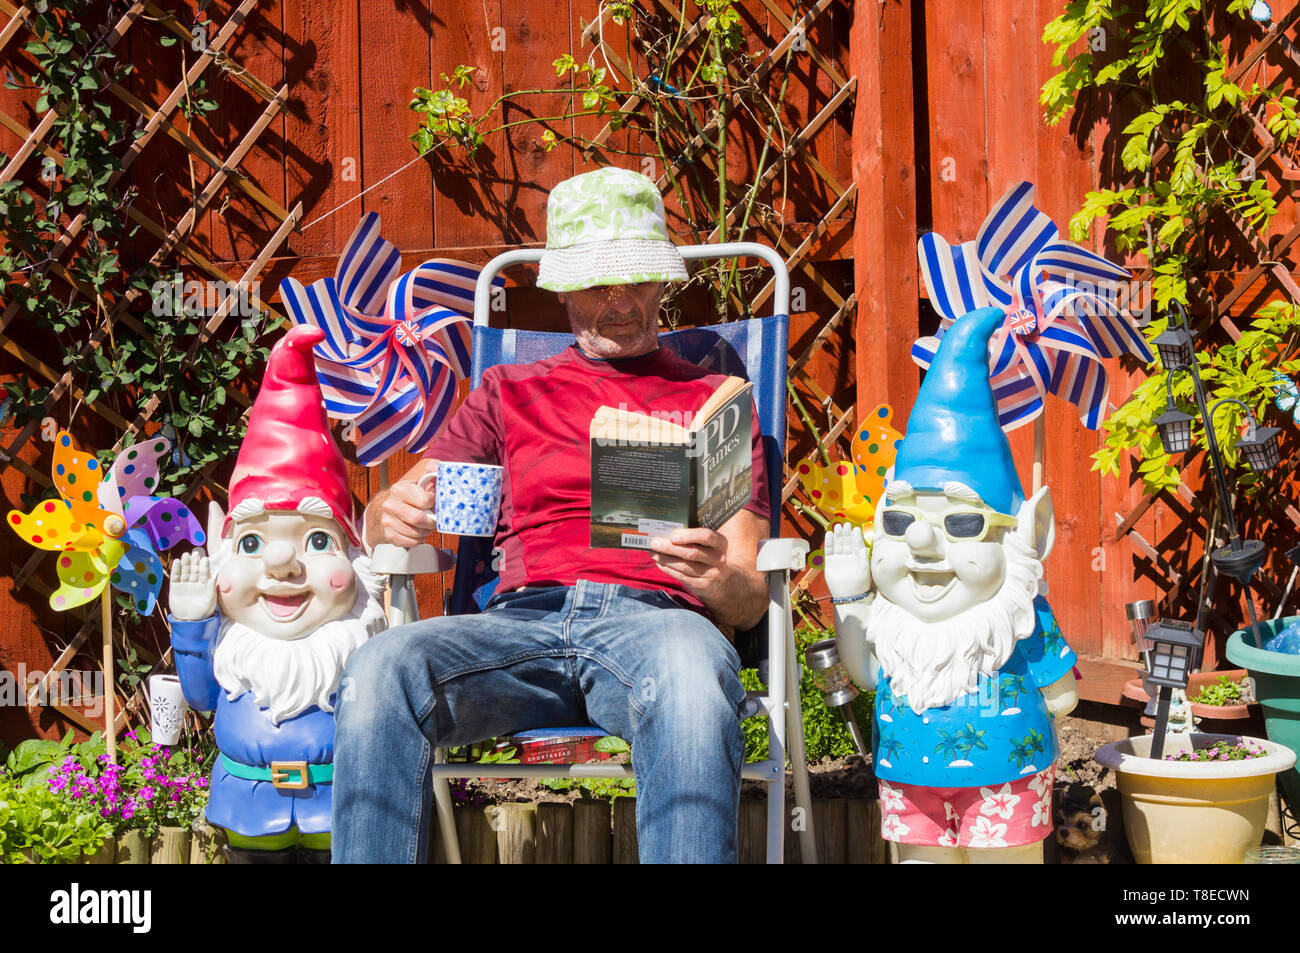 Mature man relaxing in garden flanked by garden gnomes. Summer, heatwave. UK Stock Photo